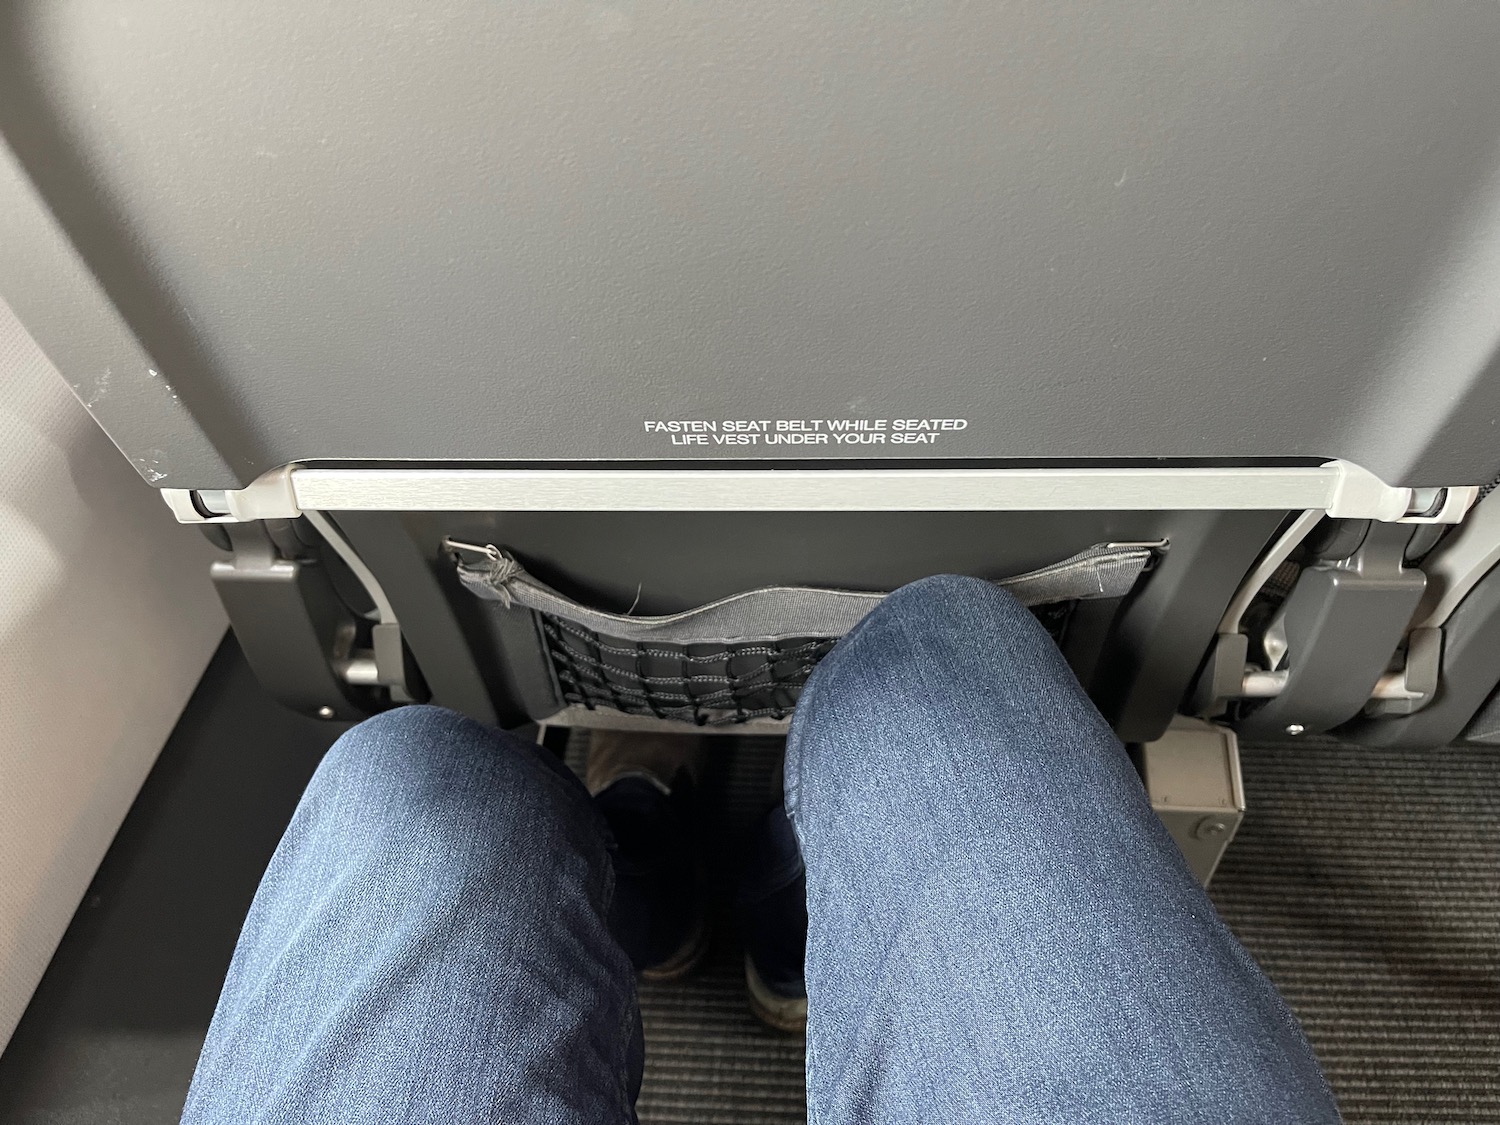 a person's legs in jeans and a seat belt